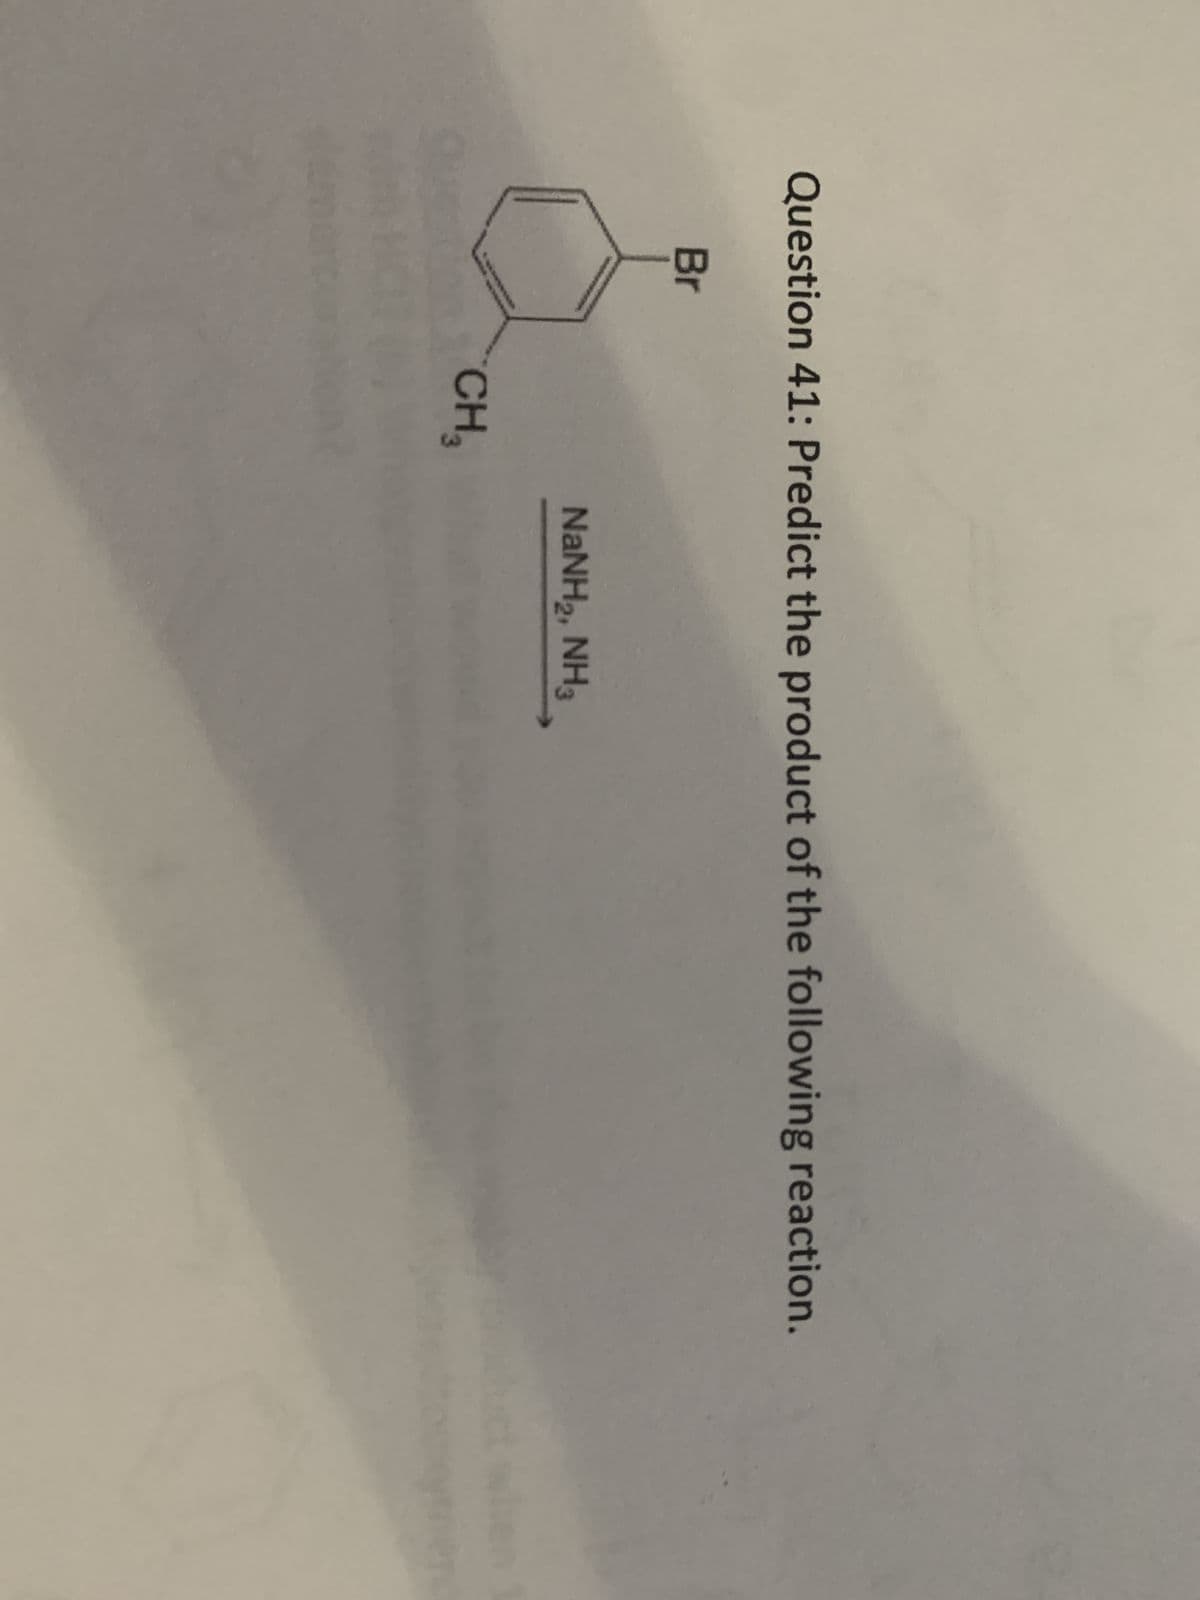 Question 41: Predict the product of the following reaction.
Br
CH₂
NaNH2, NH3